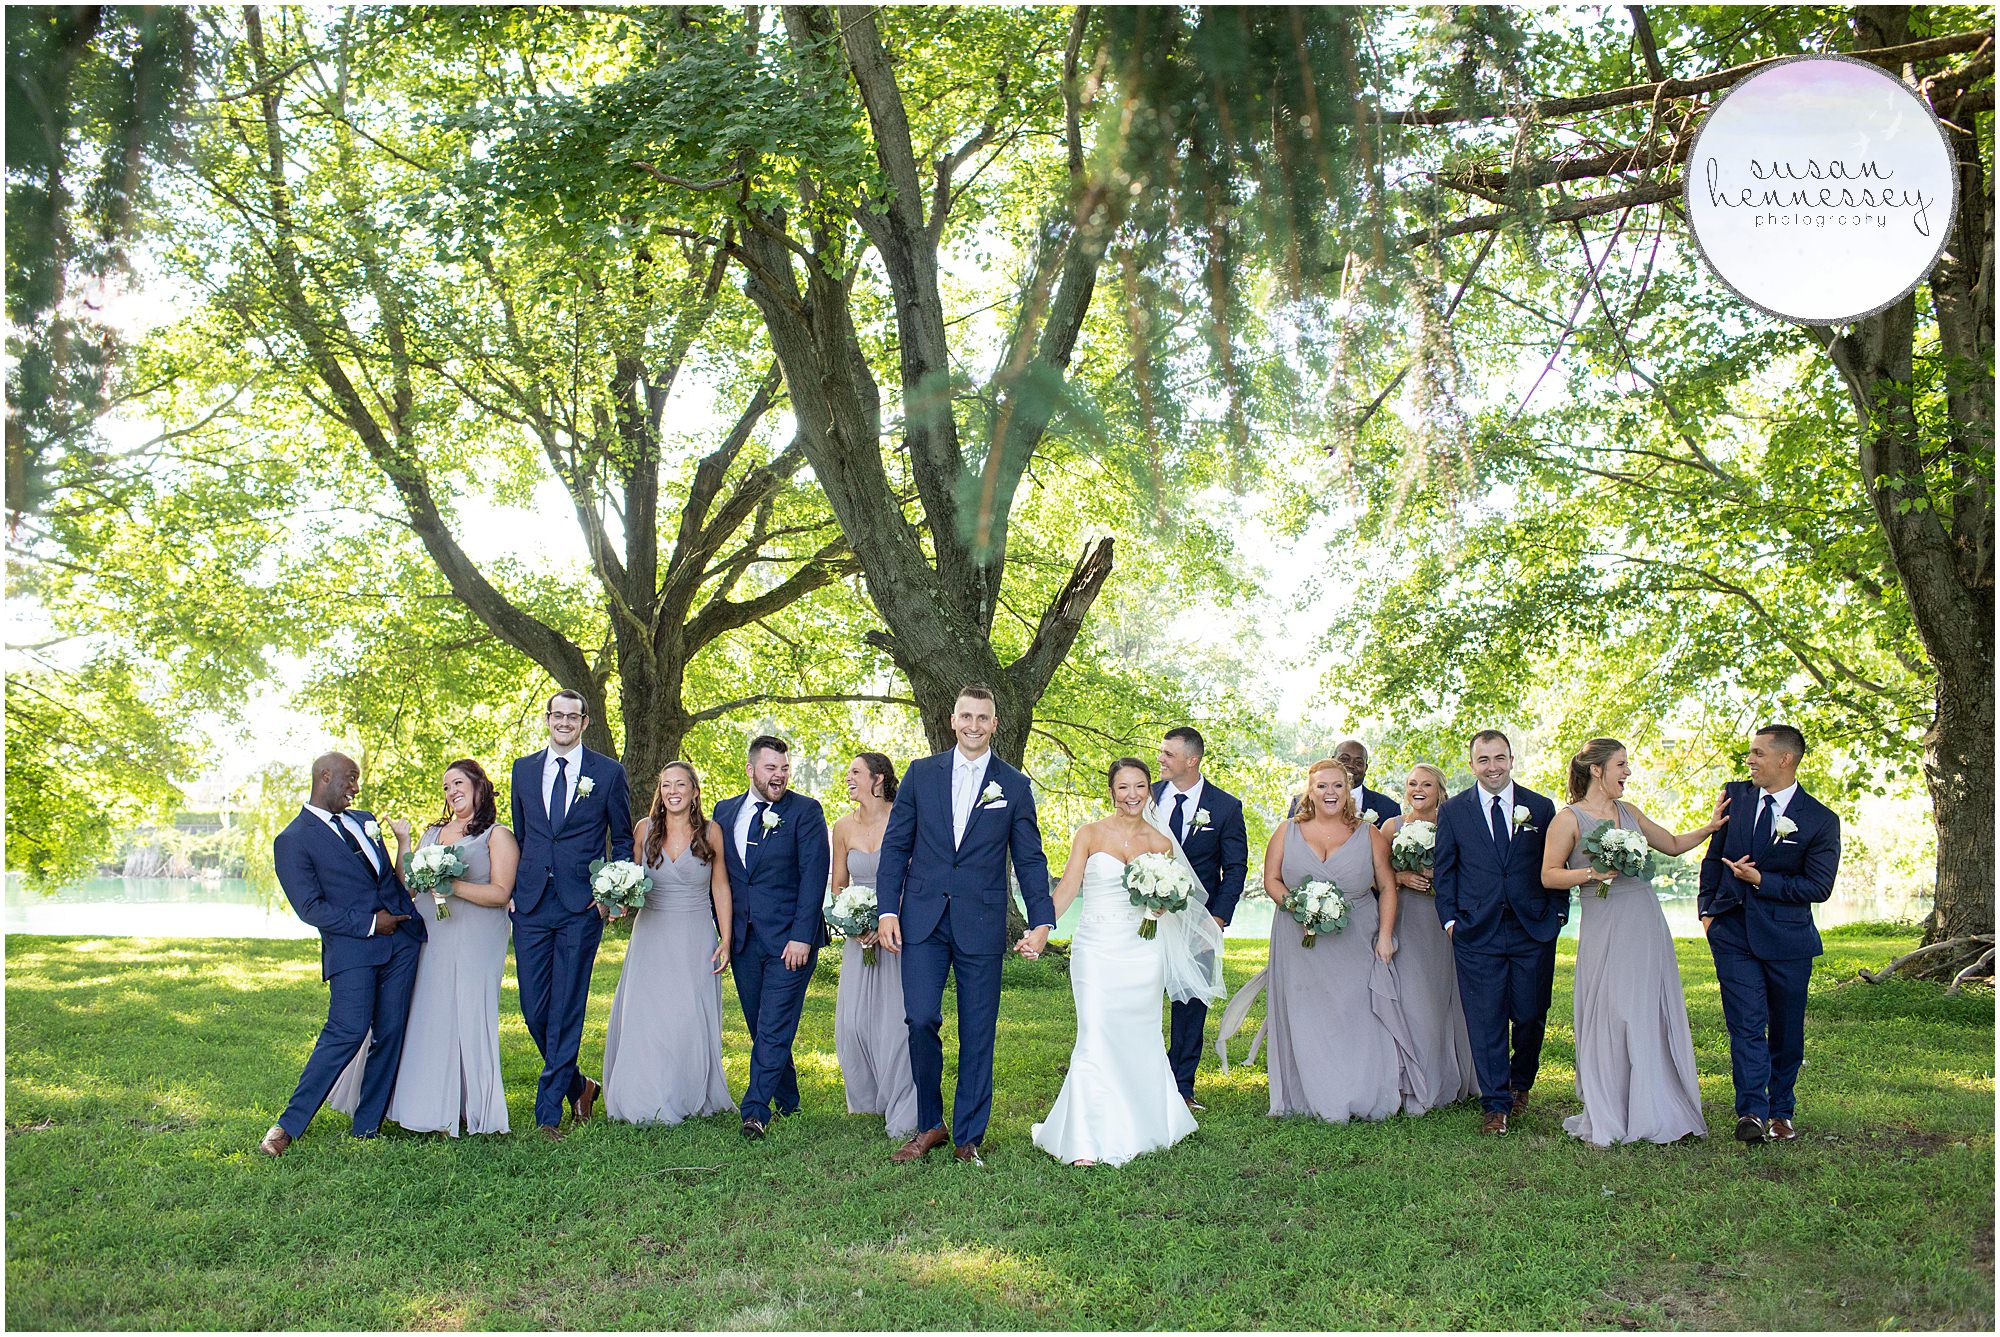 Bridal party at Summer wedding in South Jersey